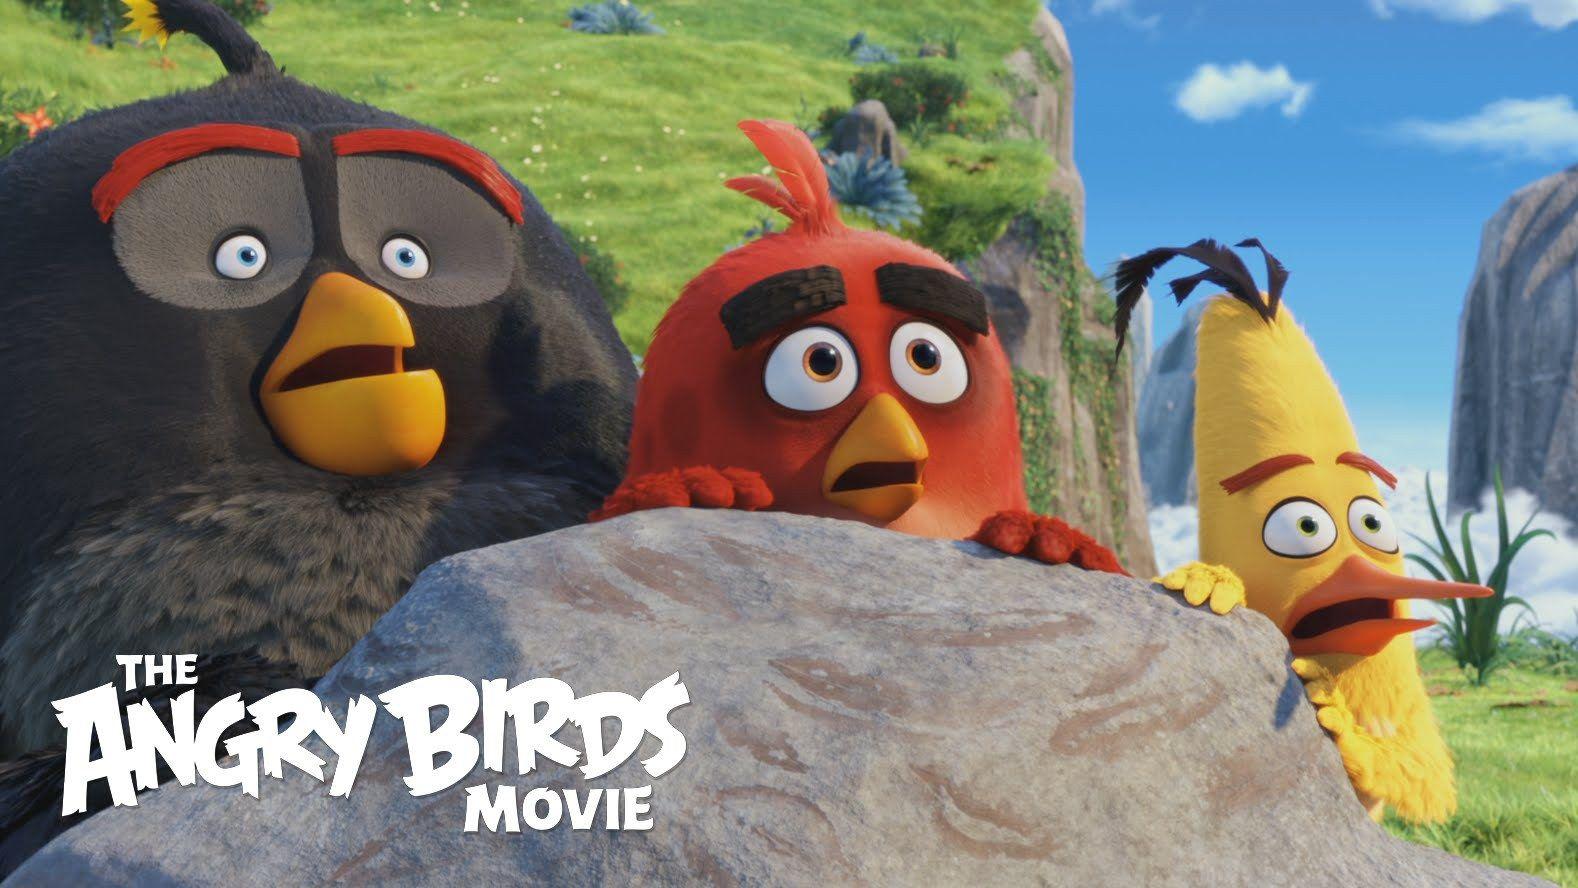 The Angry Birds Movie Movies Image Photo Picture Background